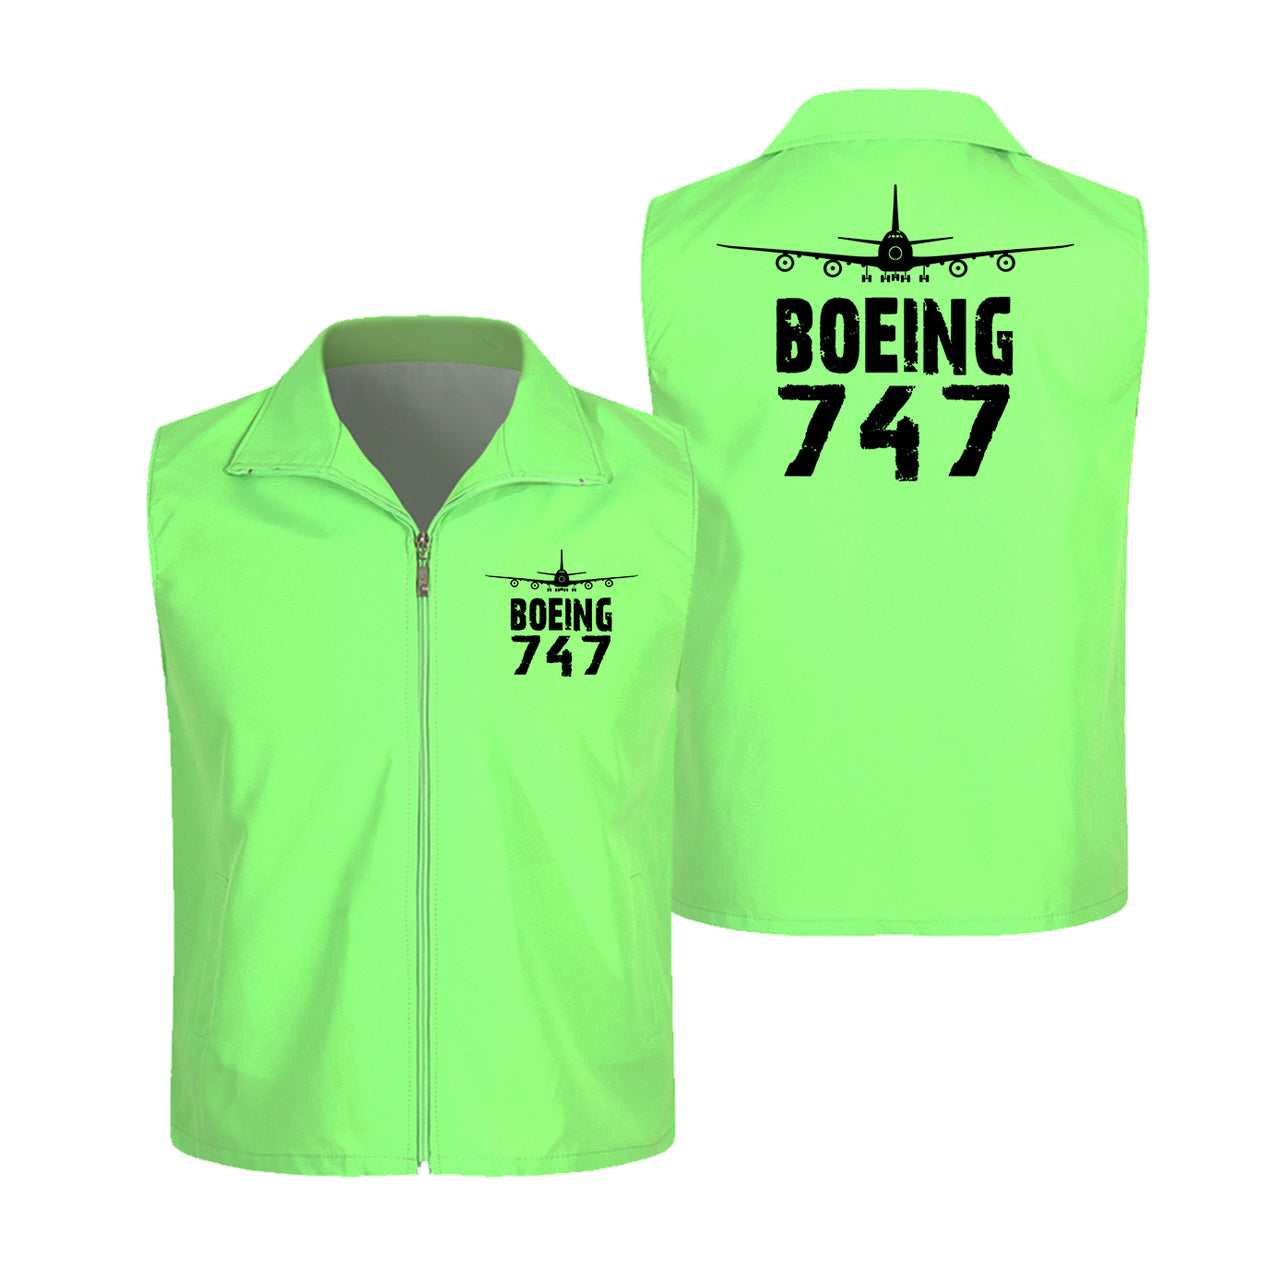 Boeing 747 & Plane Designed Thin Style Vests